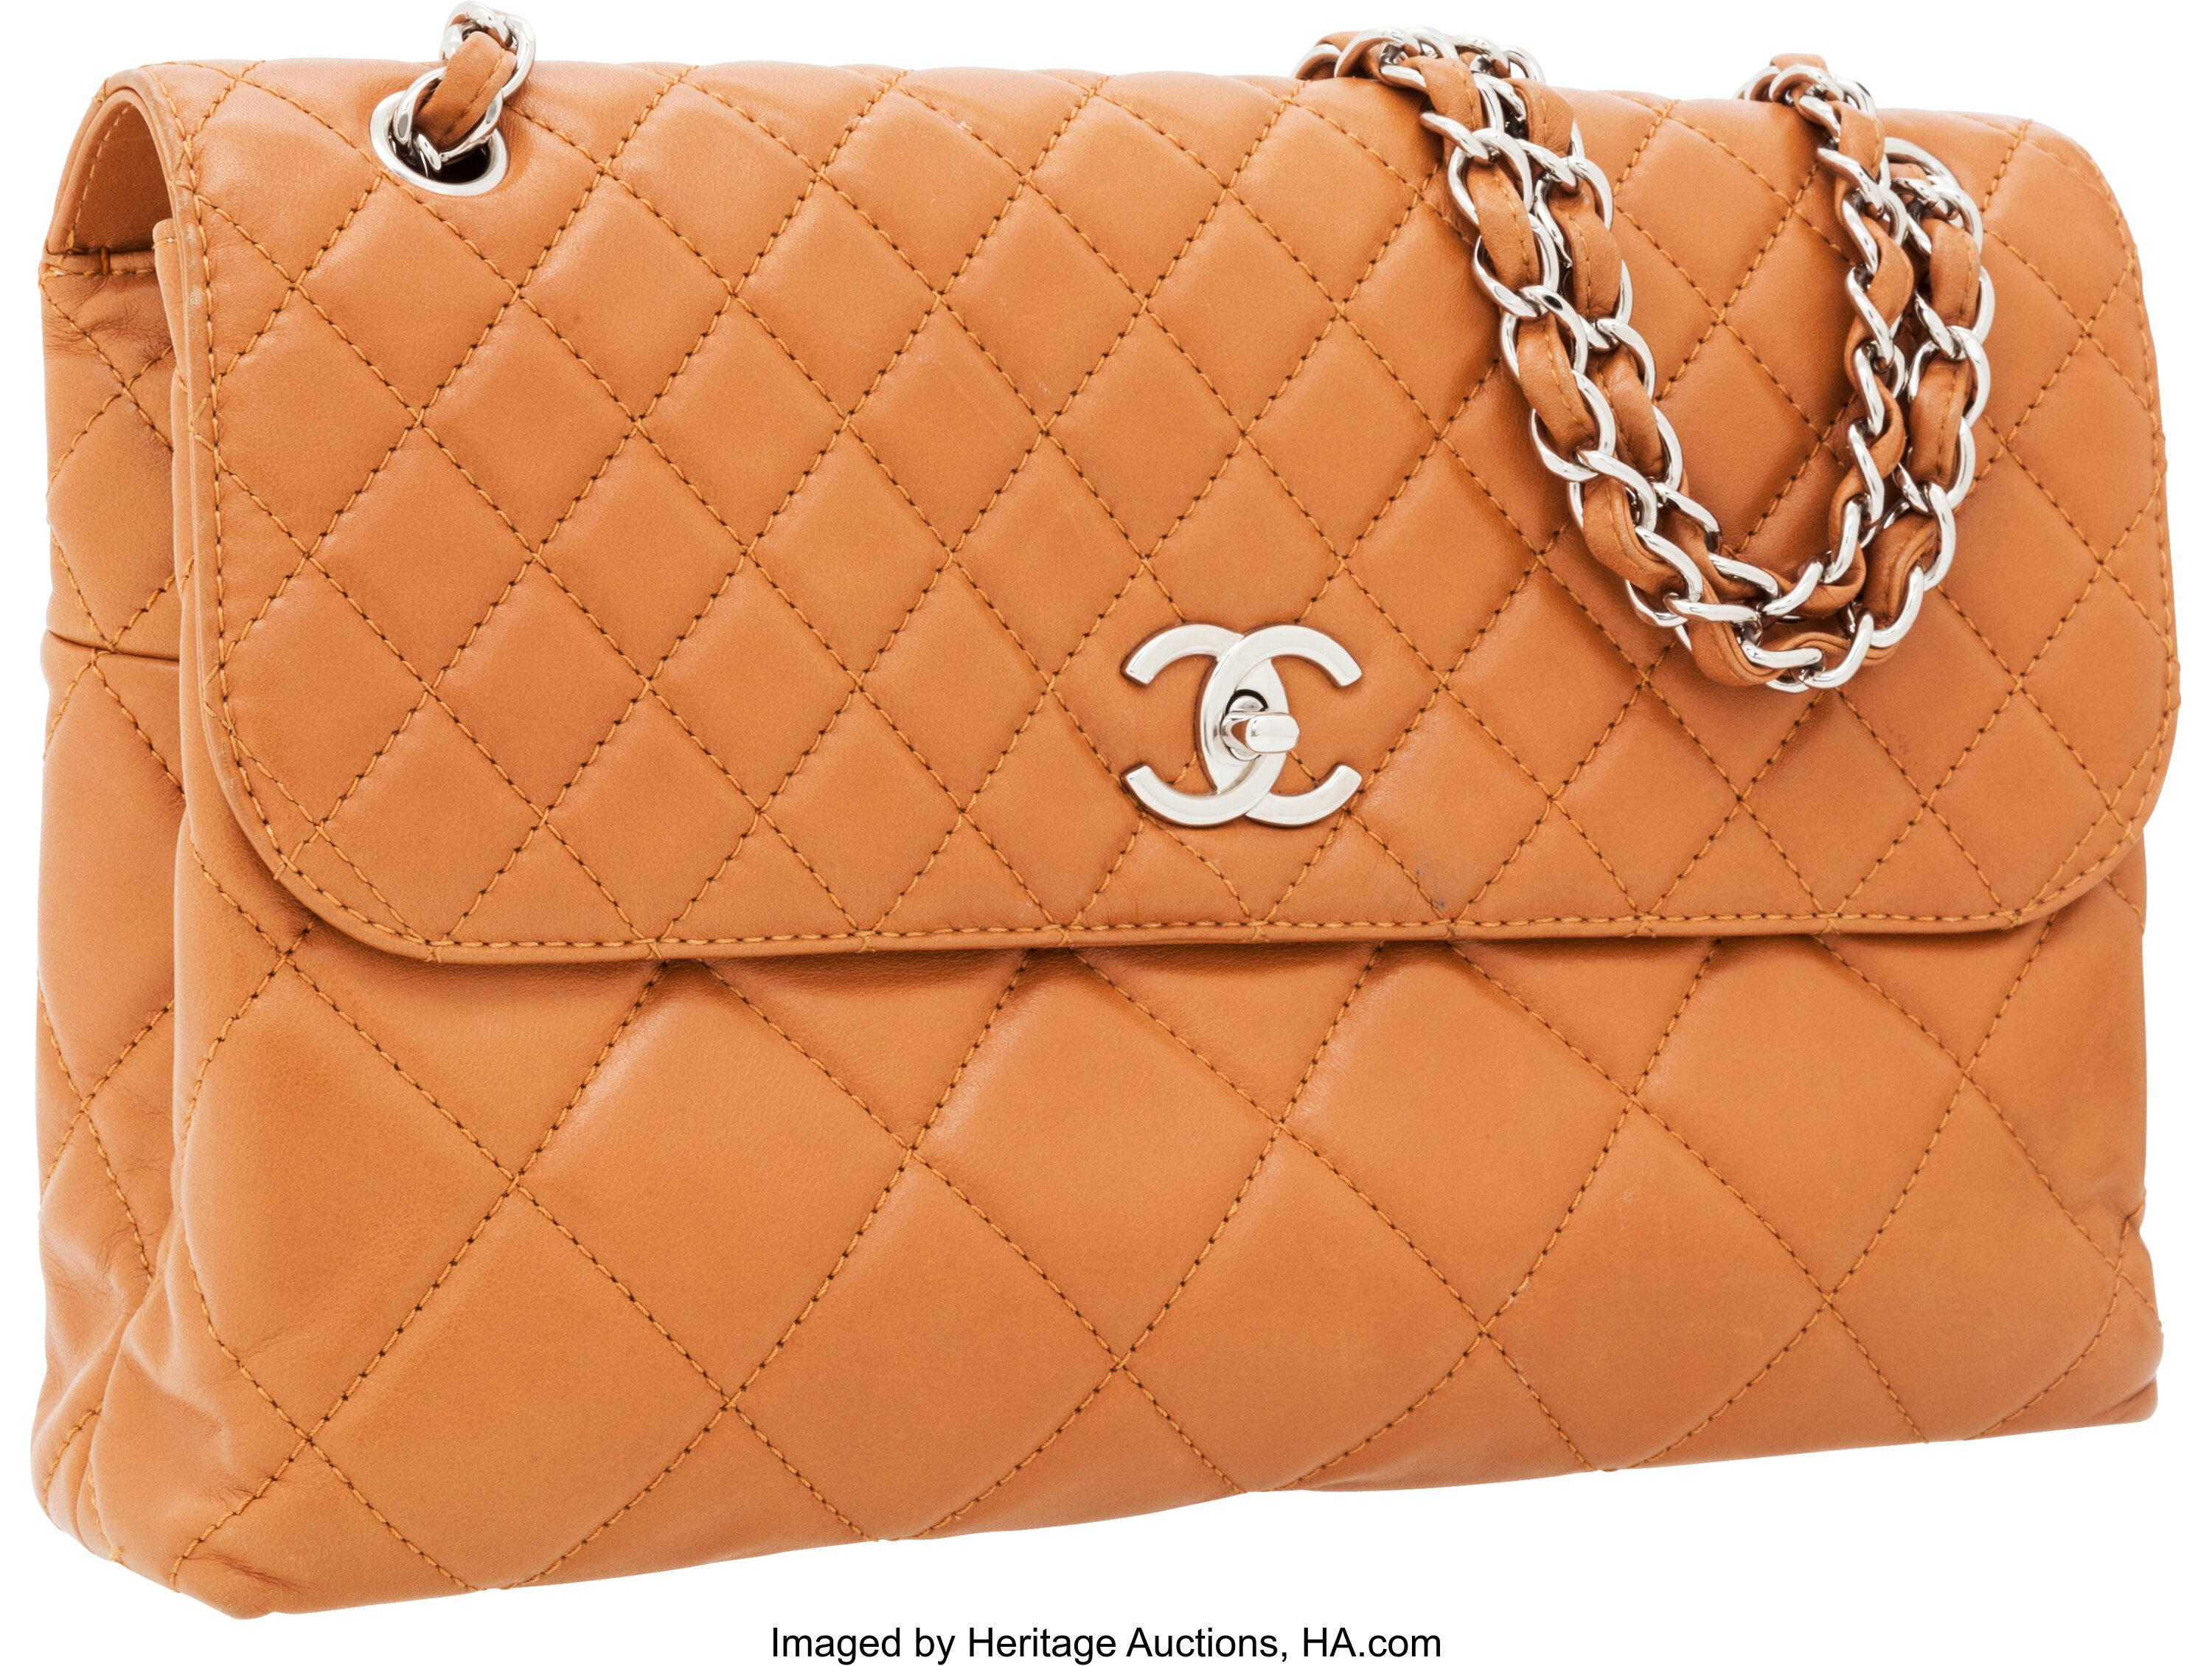 Chanel Chocolate Brown Quilted Leather Jumbo Classic Single Flap Bag Chanel